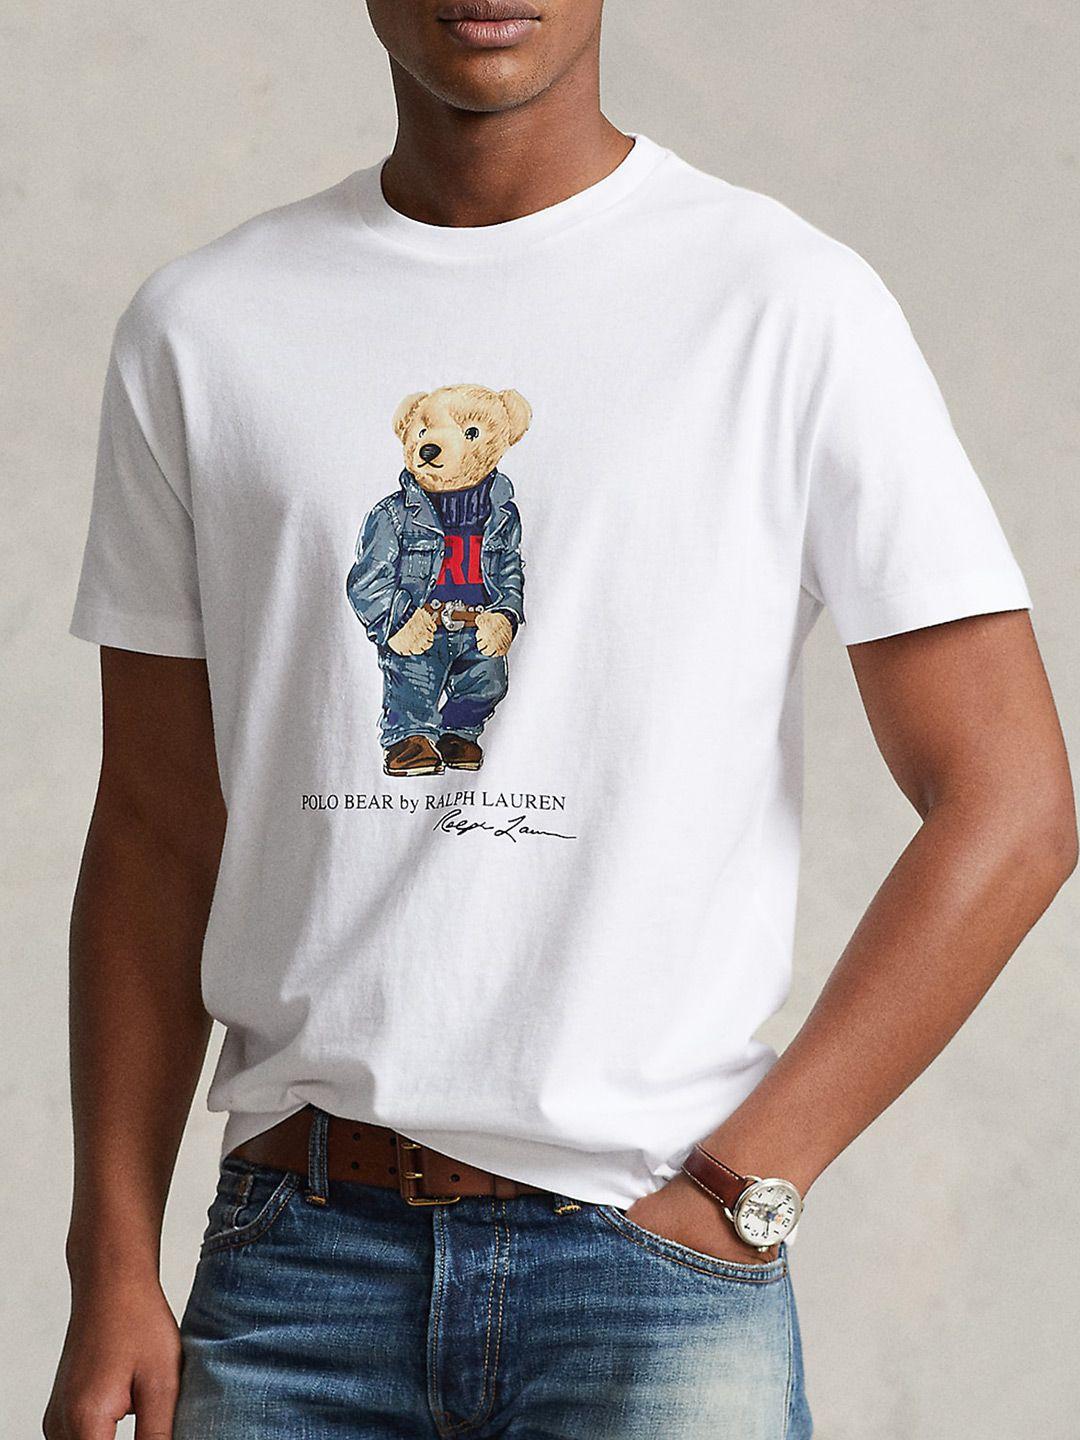 polo ralph lauren graphic printed round neck slim fit cotton casual t-shirts